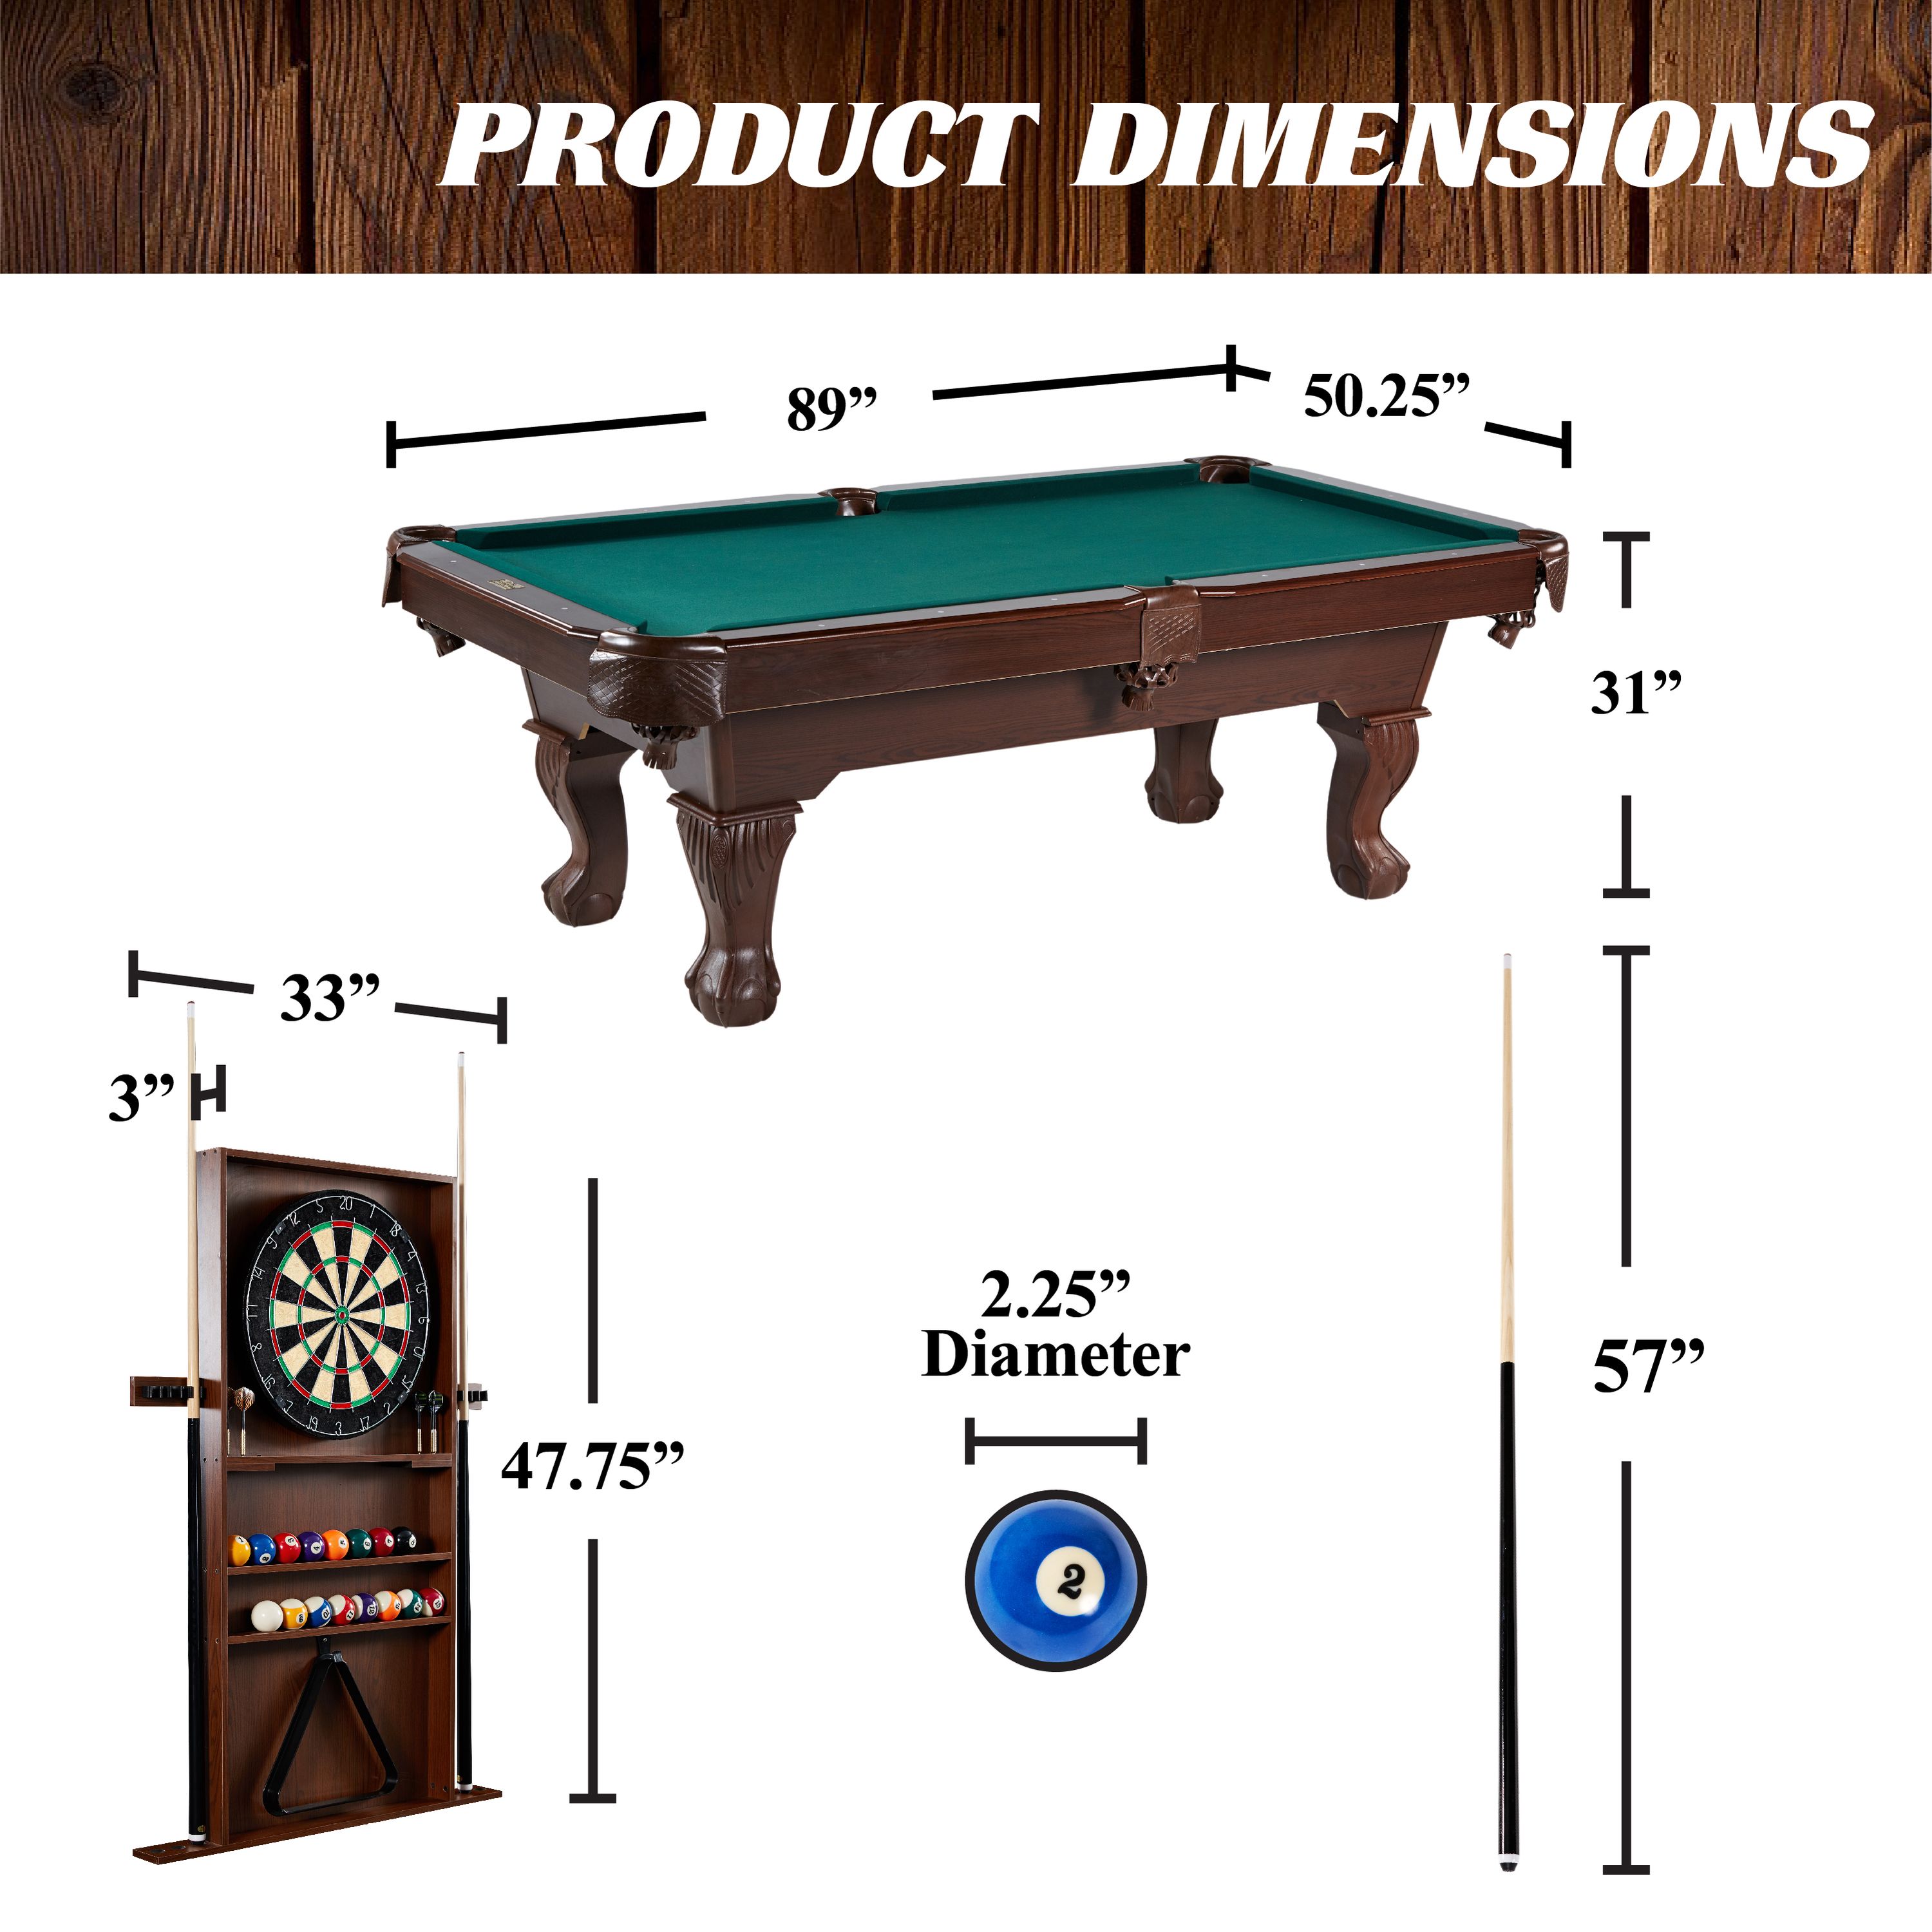 Barrington Billiards 90" Ball and Claw Leg Pool Table with Cue Rack, Dartboard Set, Green, New - image 11 of 13